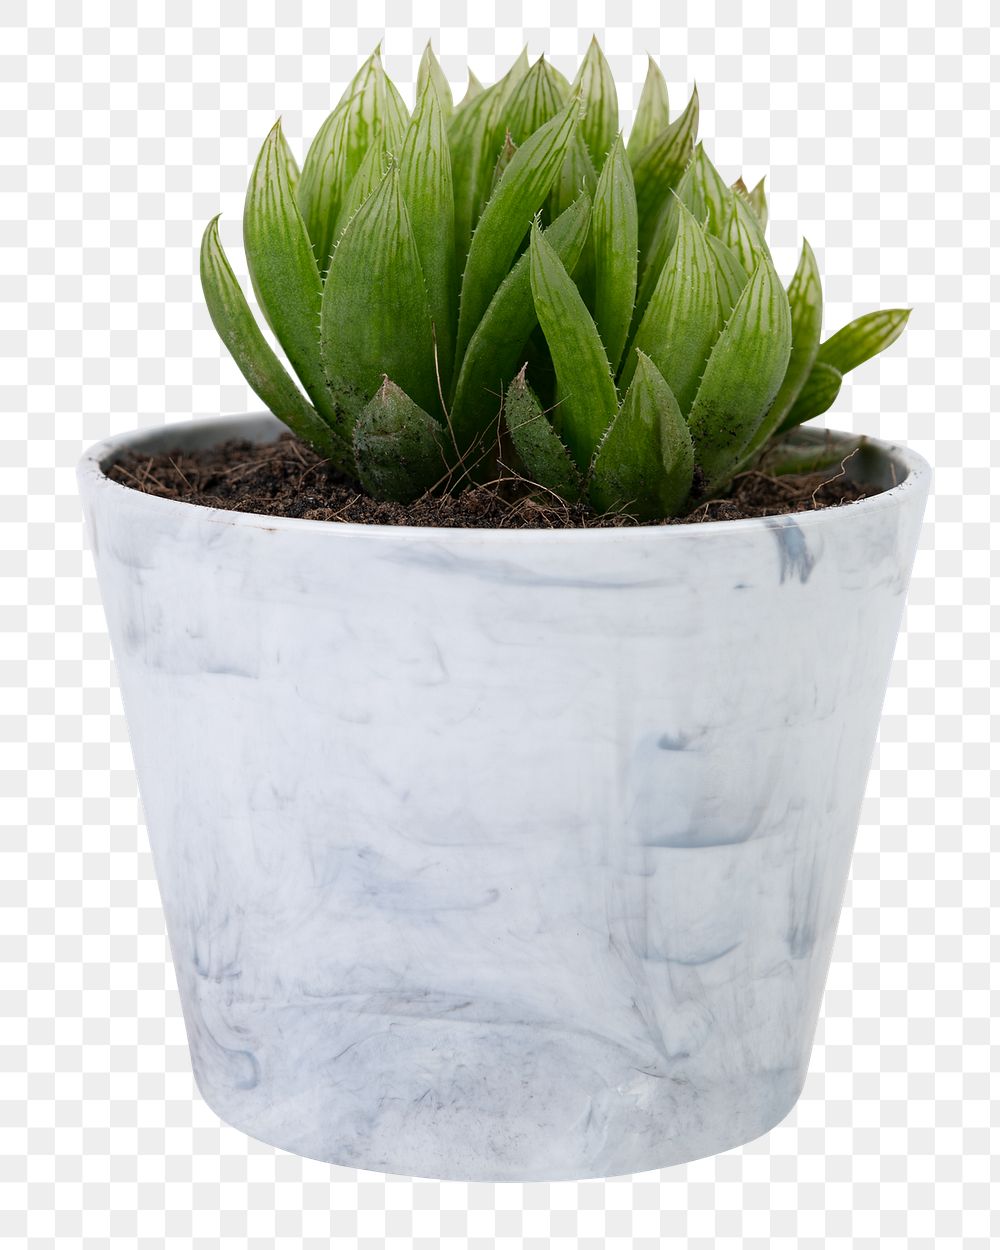 Succulent plant png mockup in a small gray pot